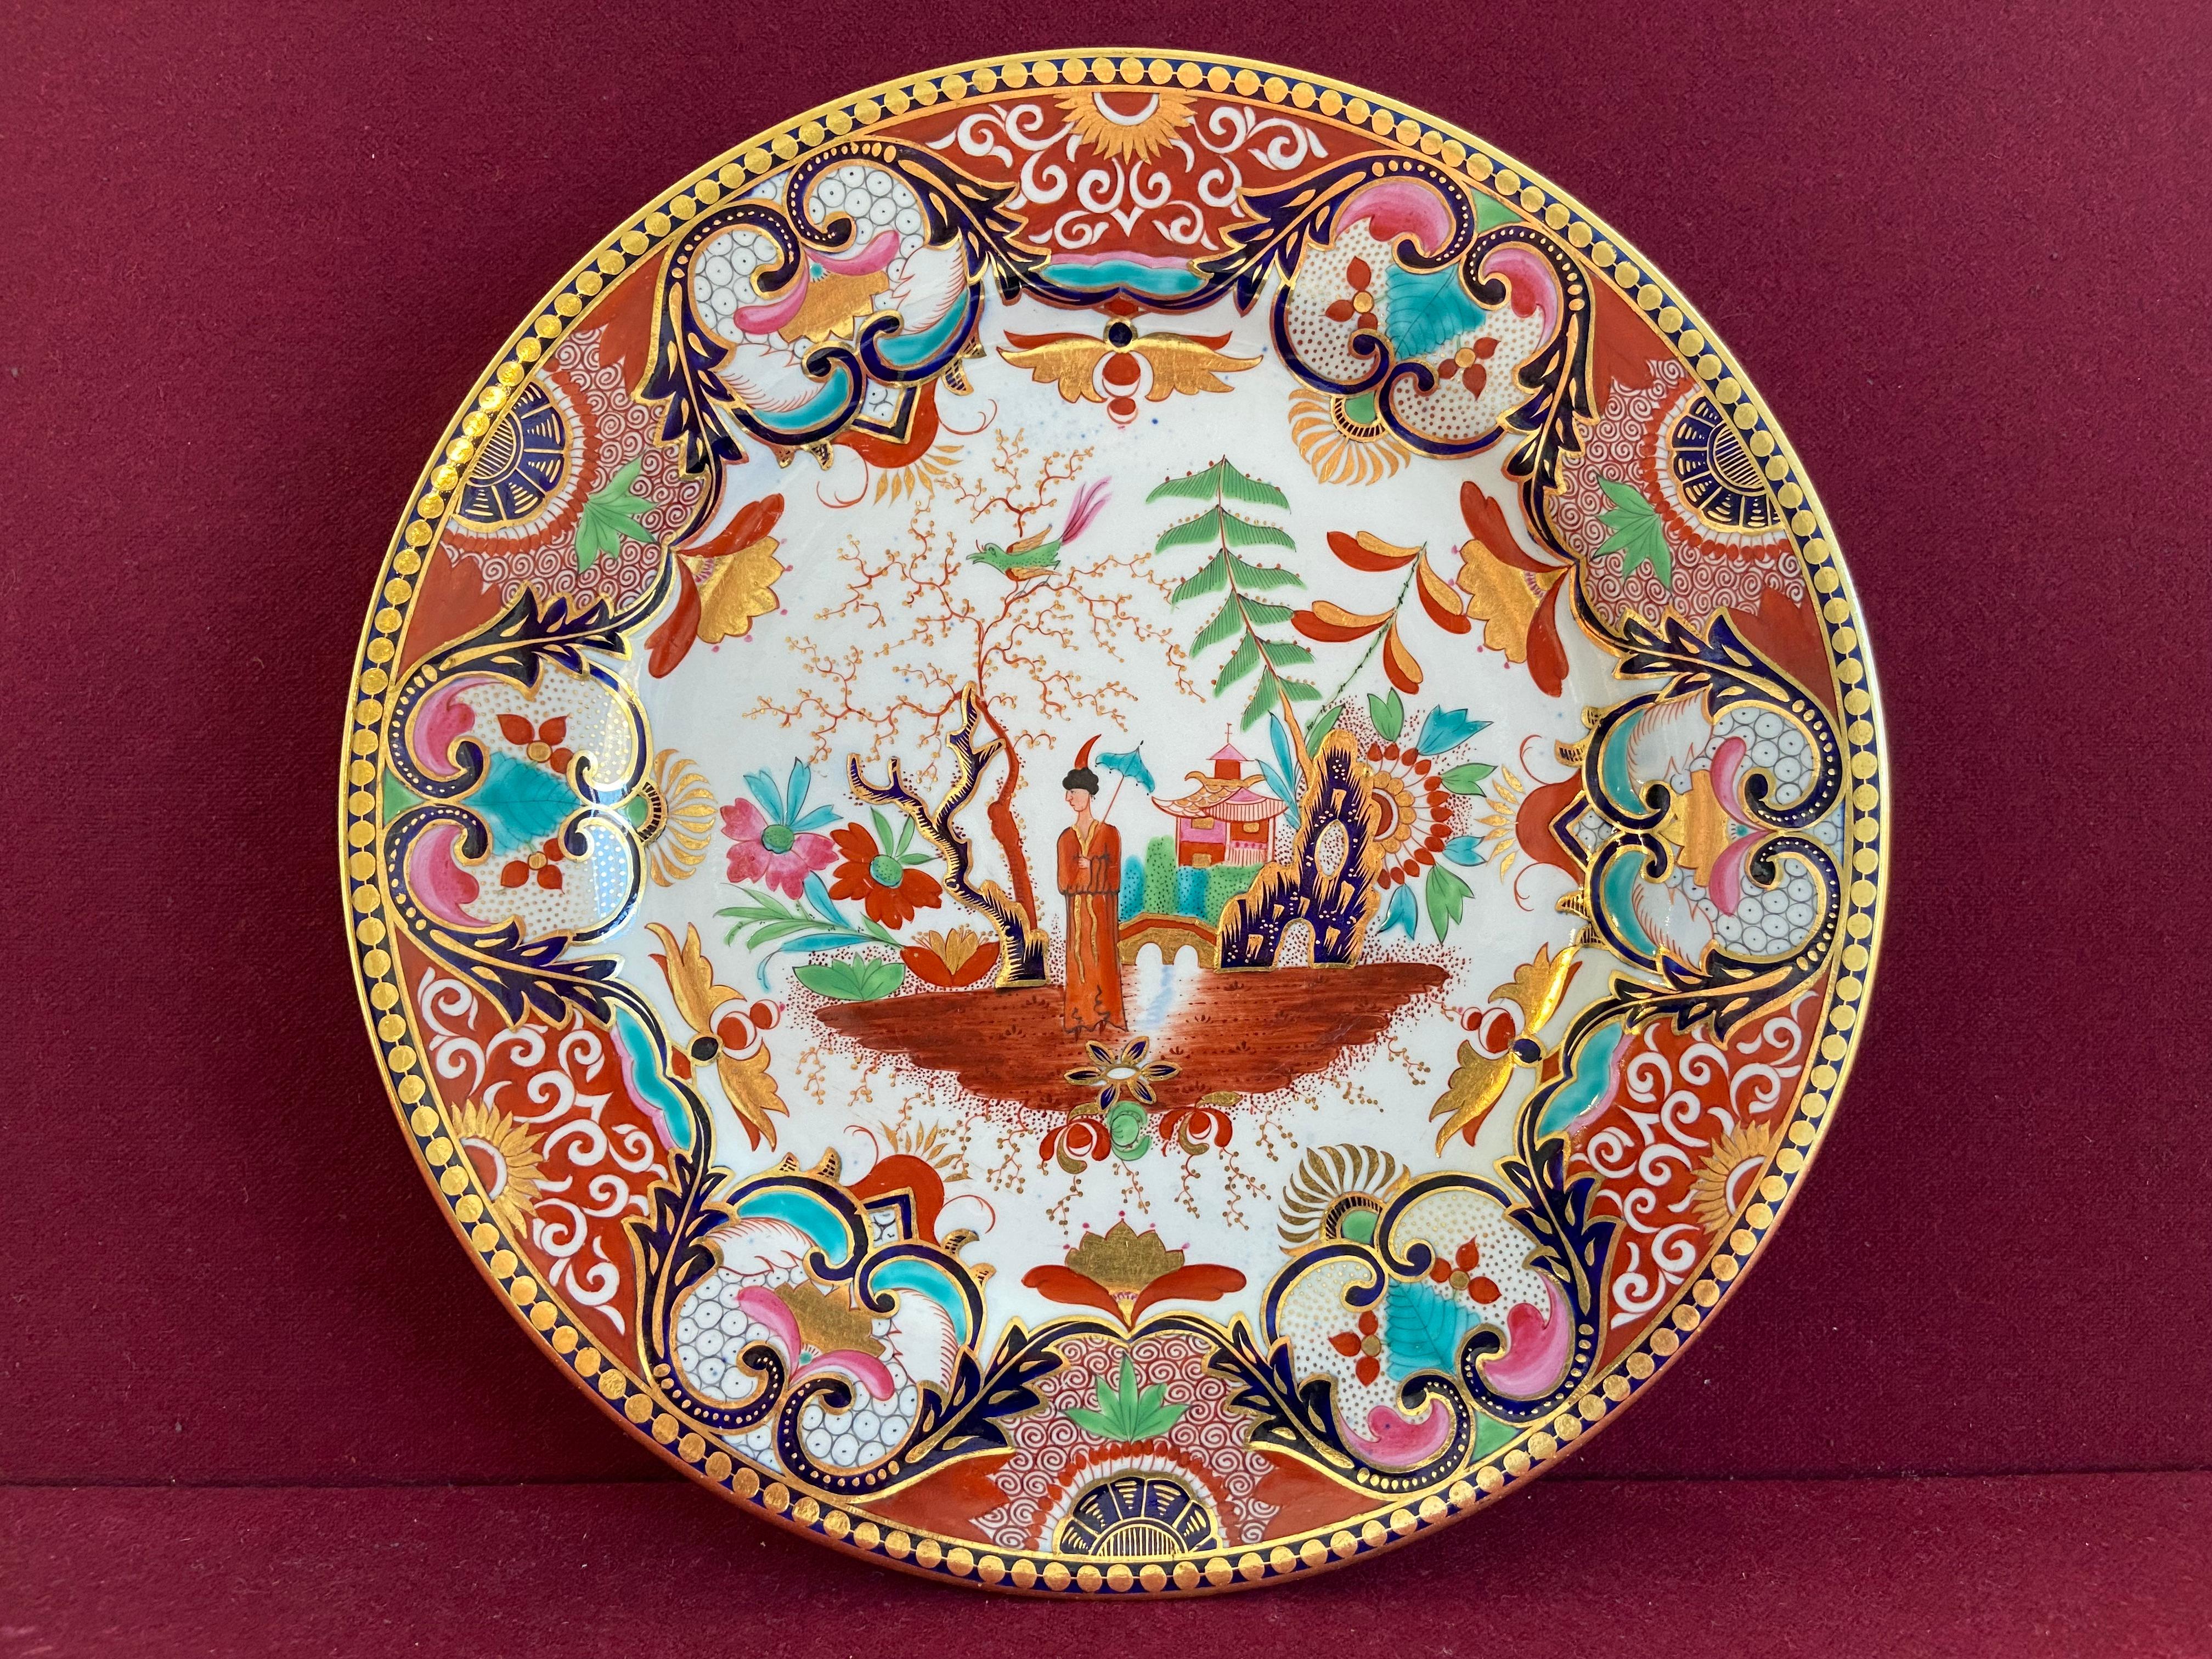 A fine Flight Barr & Barr Worcester Plate c.1815-1820. Decorated with a bold Japan style pattern



Condition: Excellent.